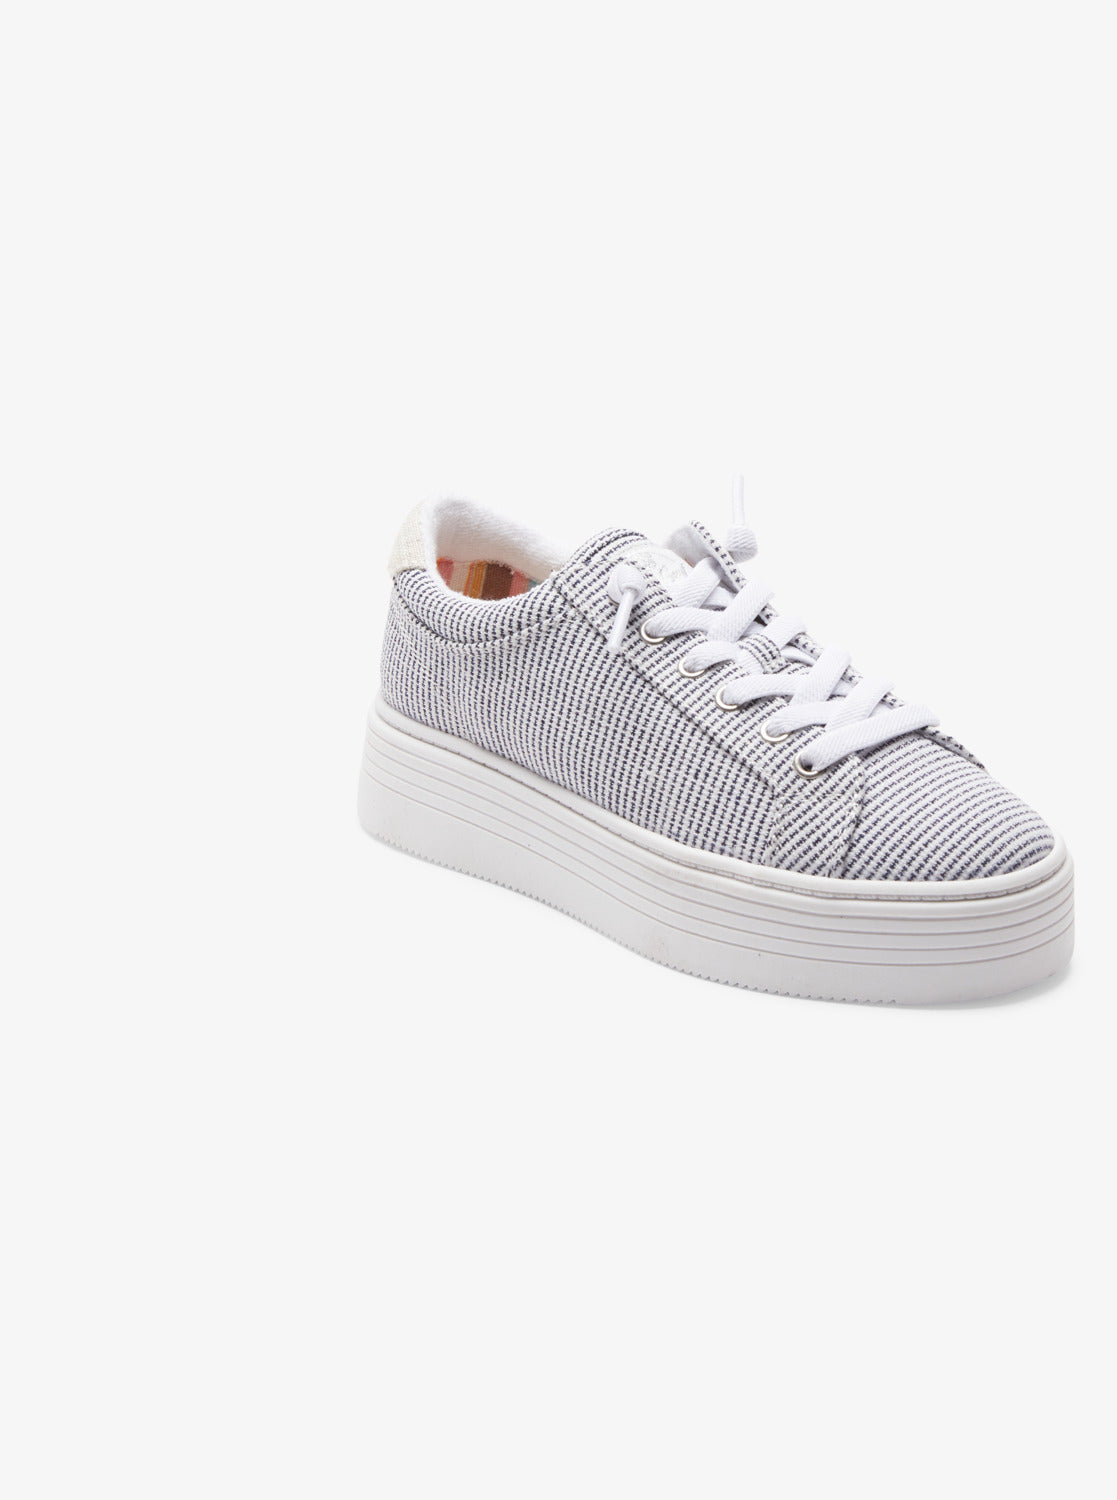 Roxy Sheilahh Womens Shoes White